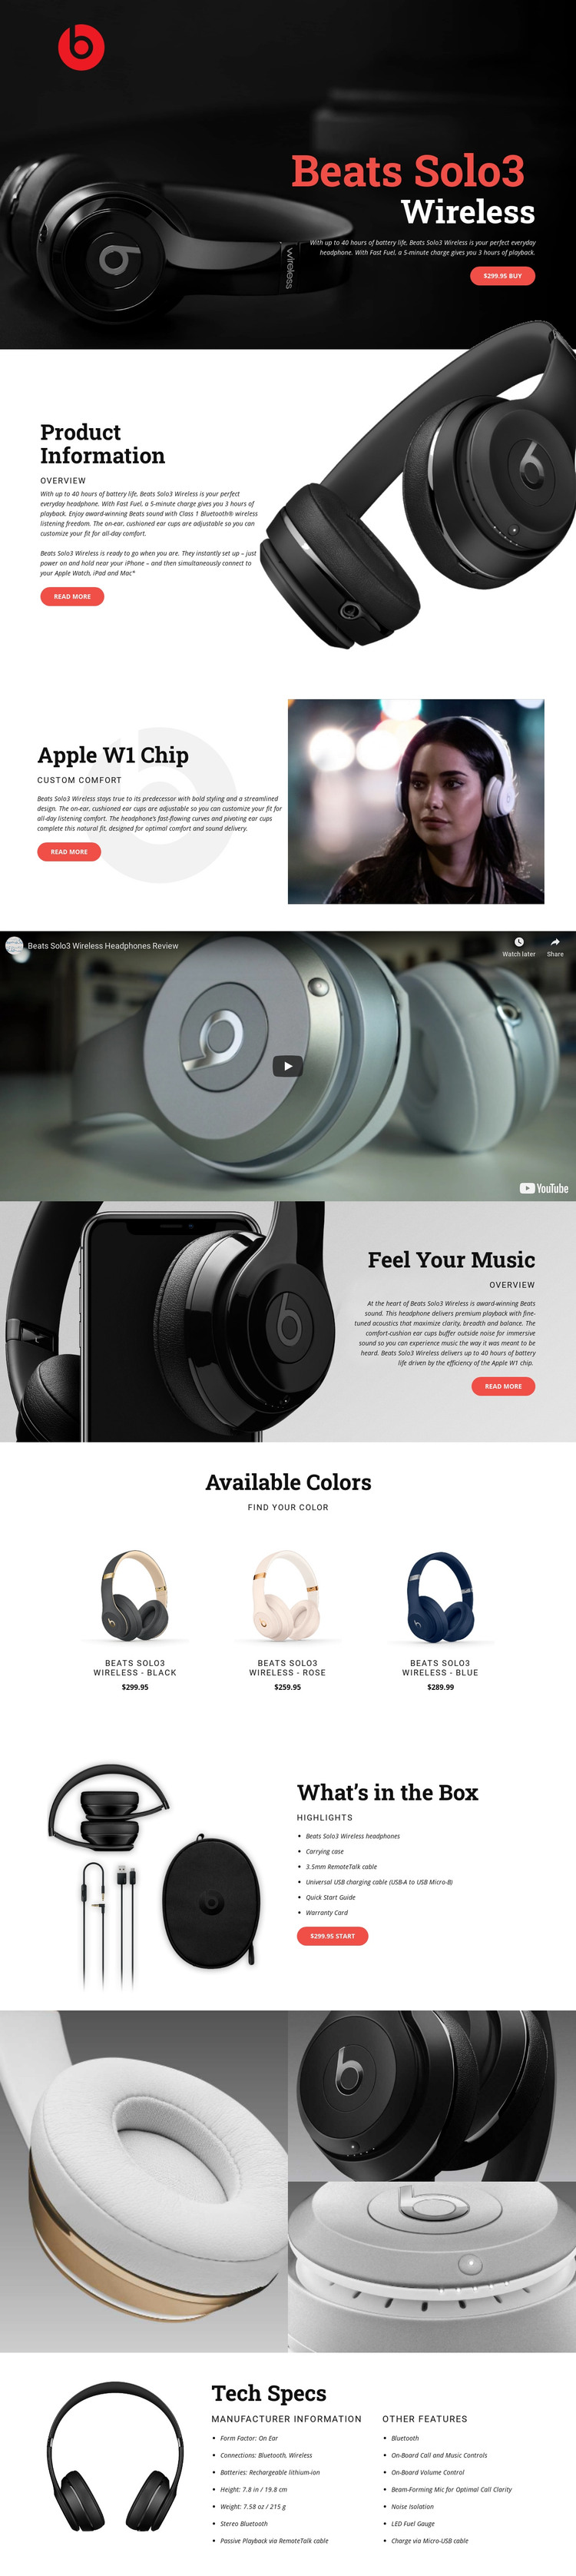 Outstanding quality of music Homepage Design